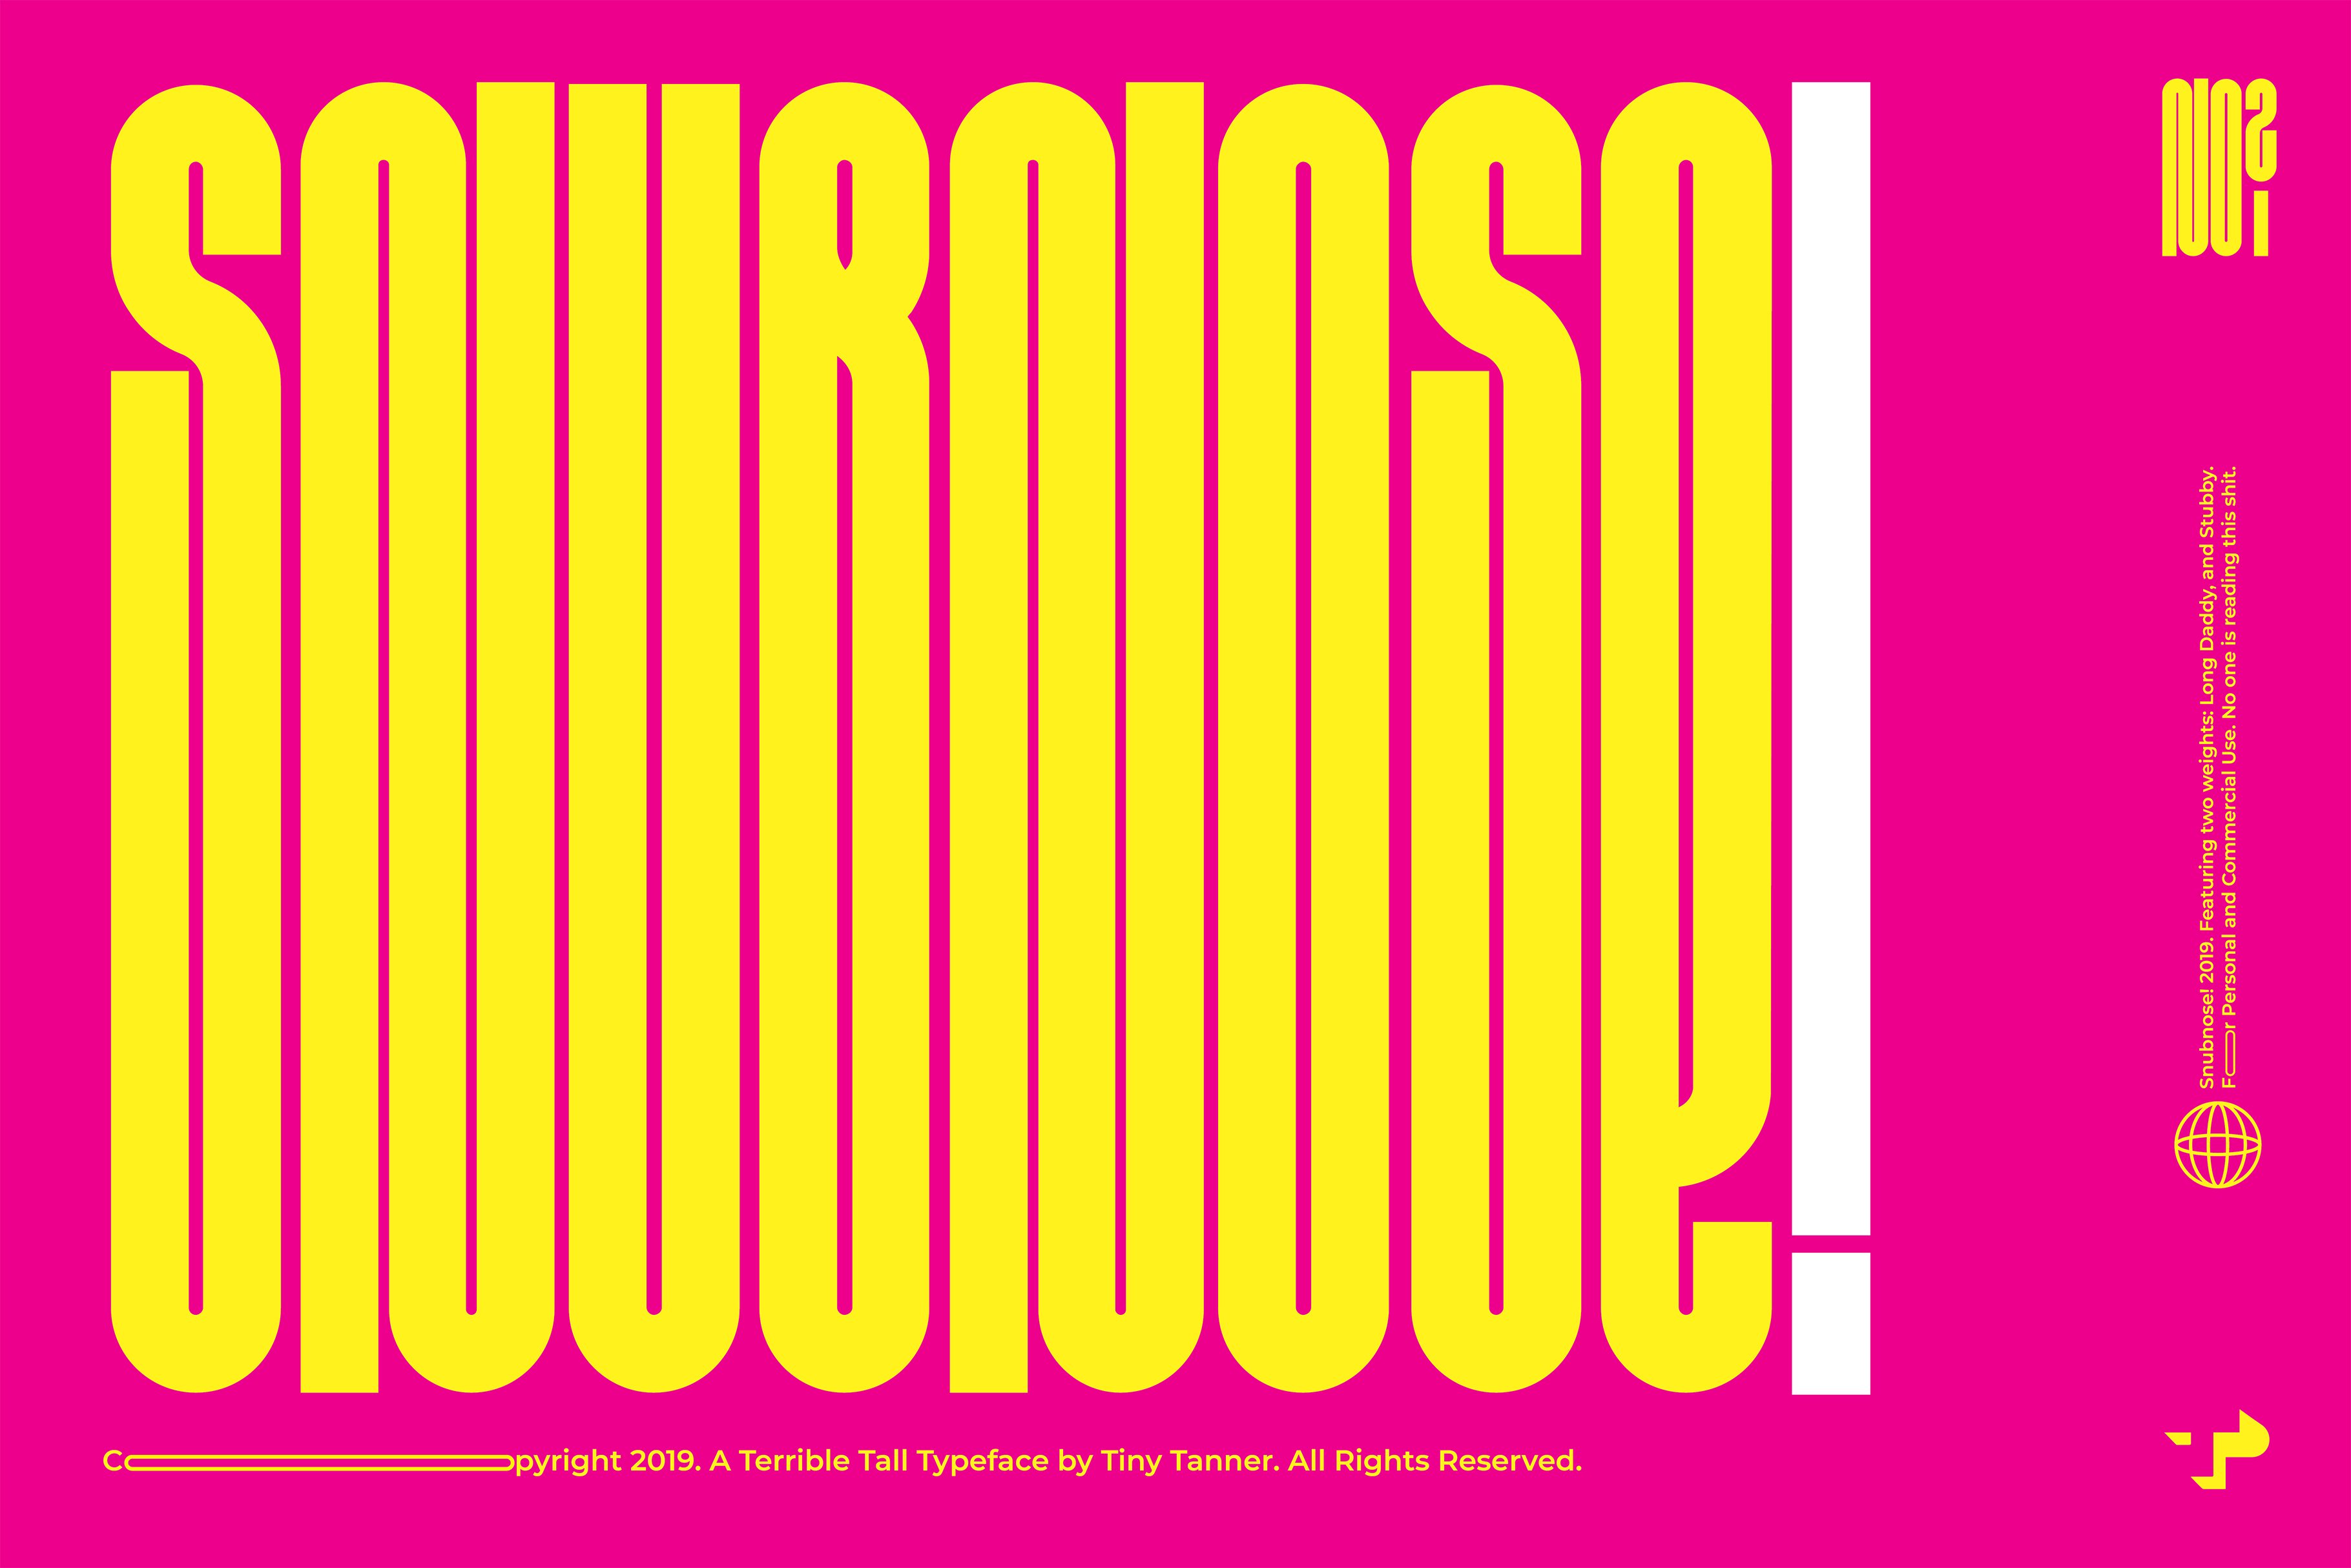 Snubnose! Display Typeface cover image.